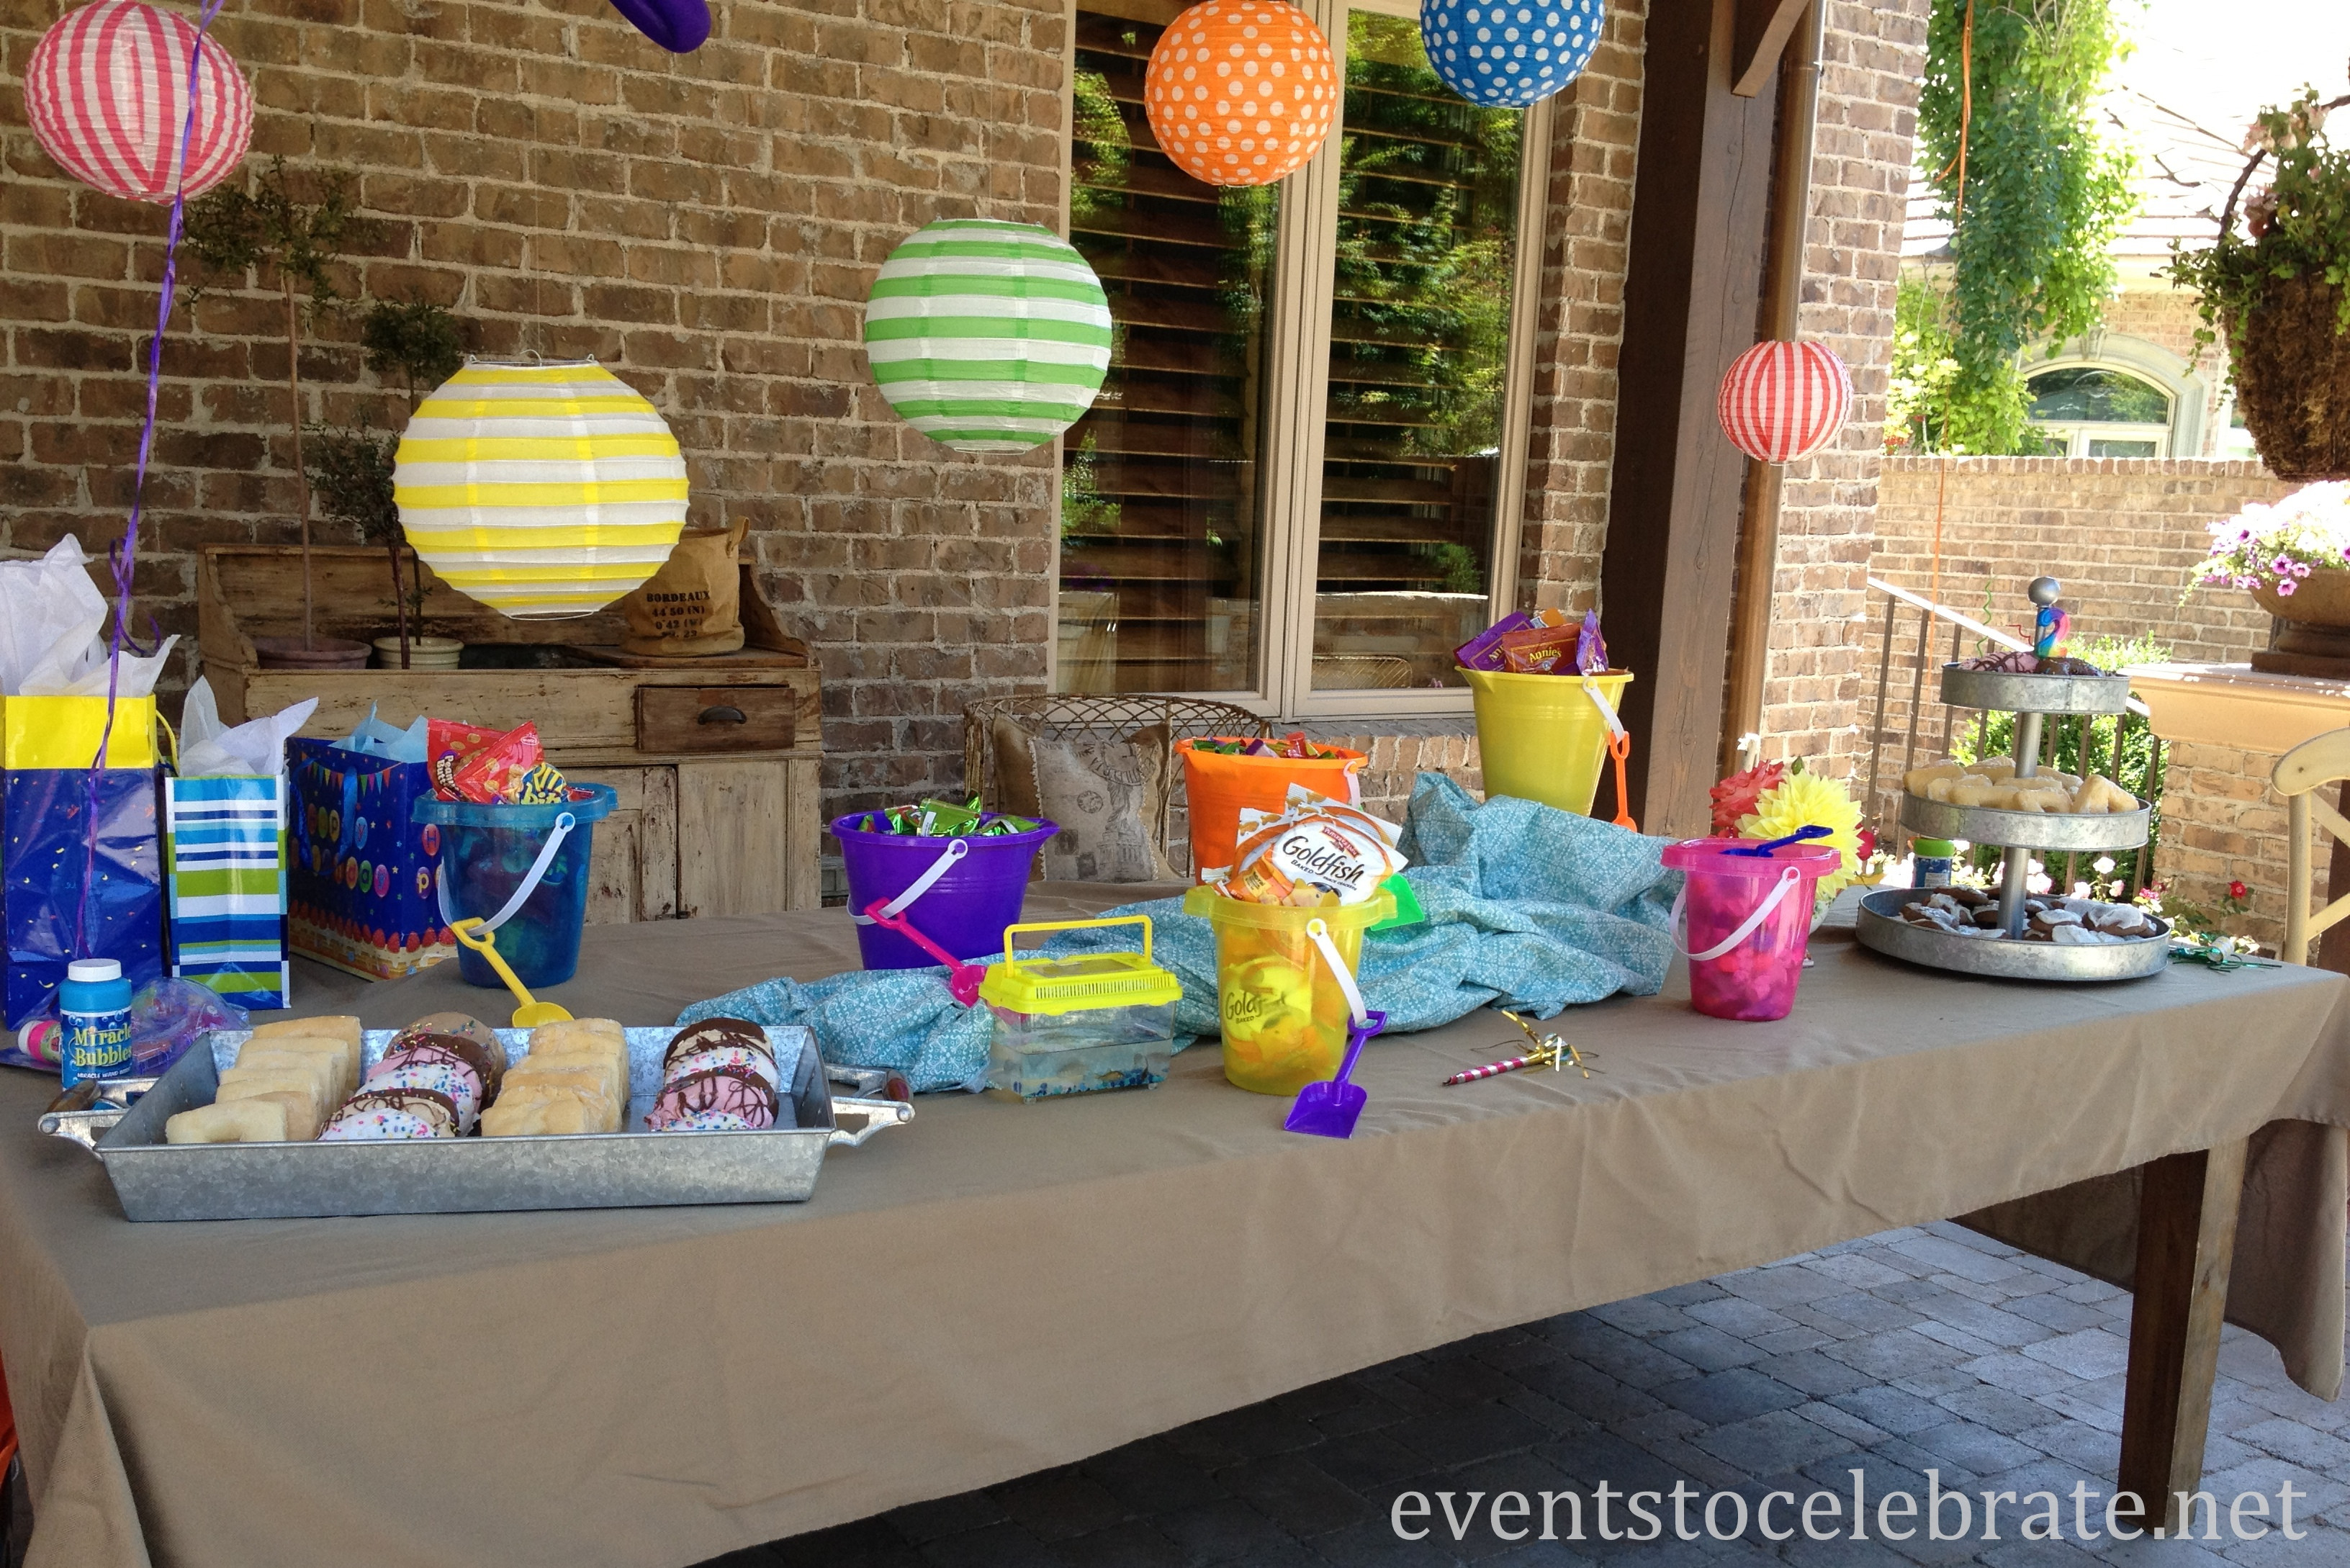 Decorating Ideas For A Beach Party
 beach balls Archives events to CELEBRATE